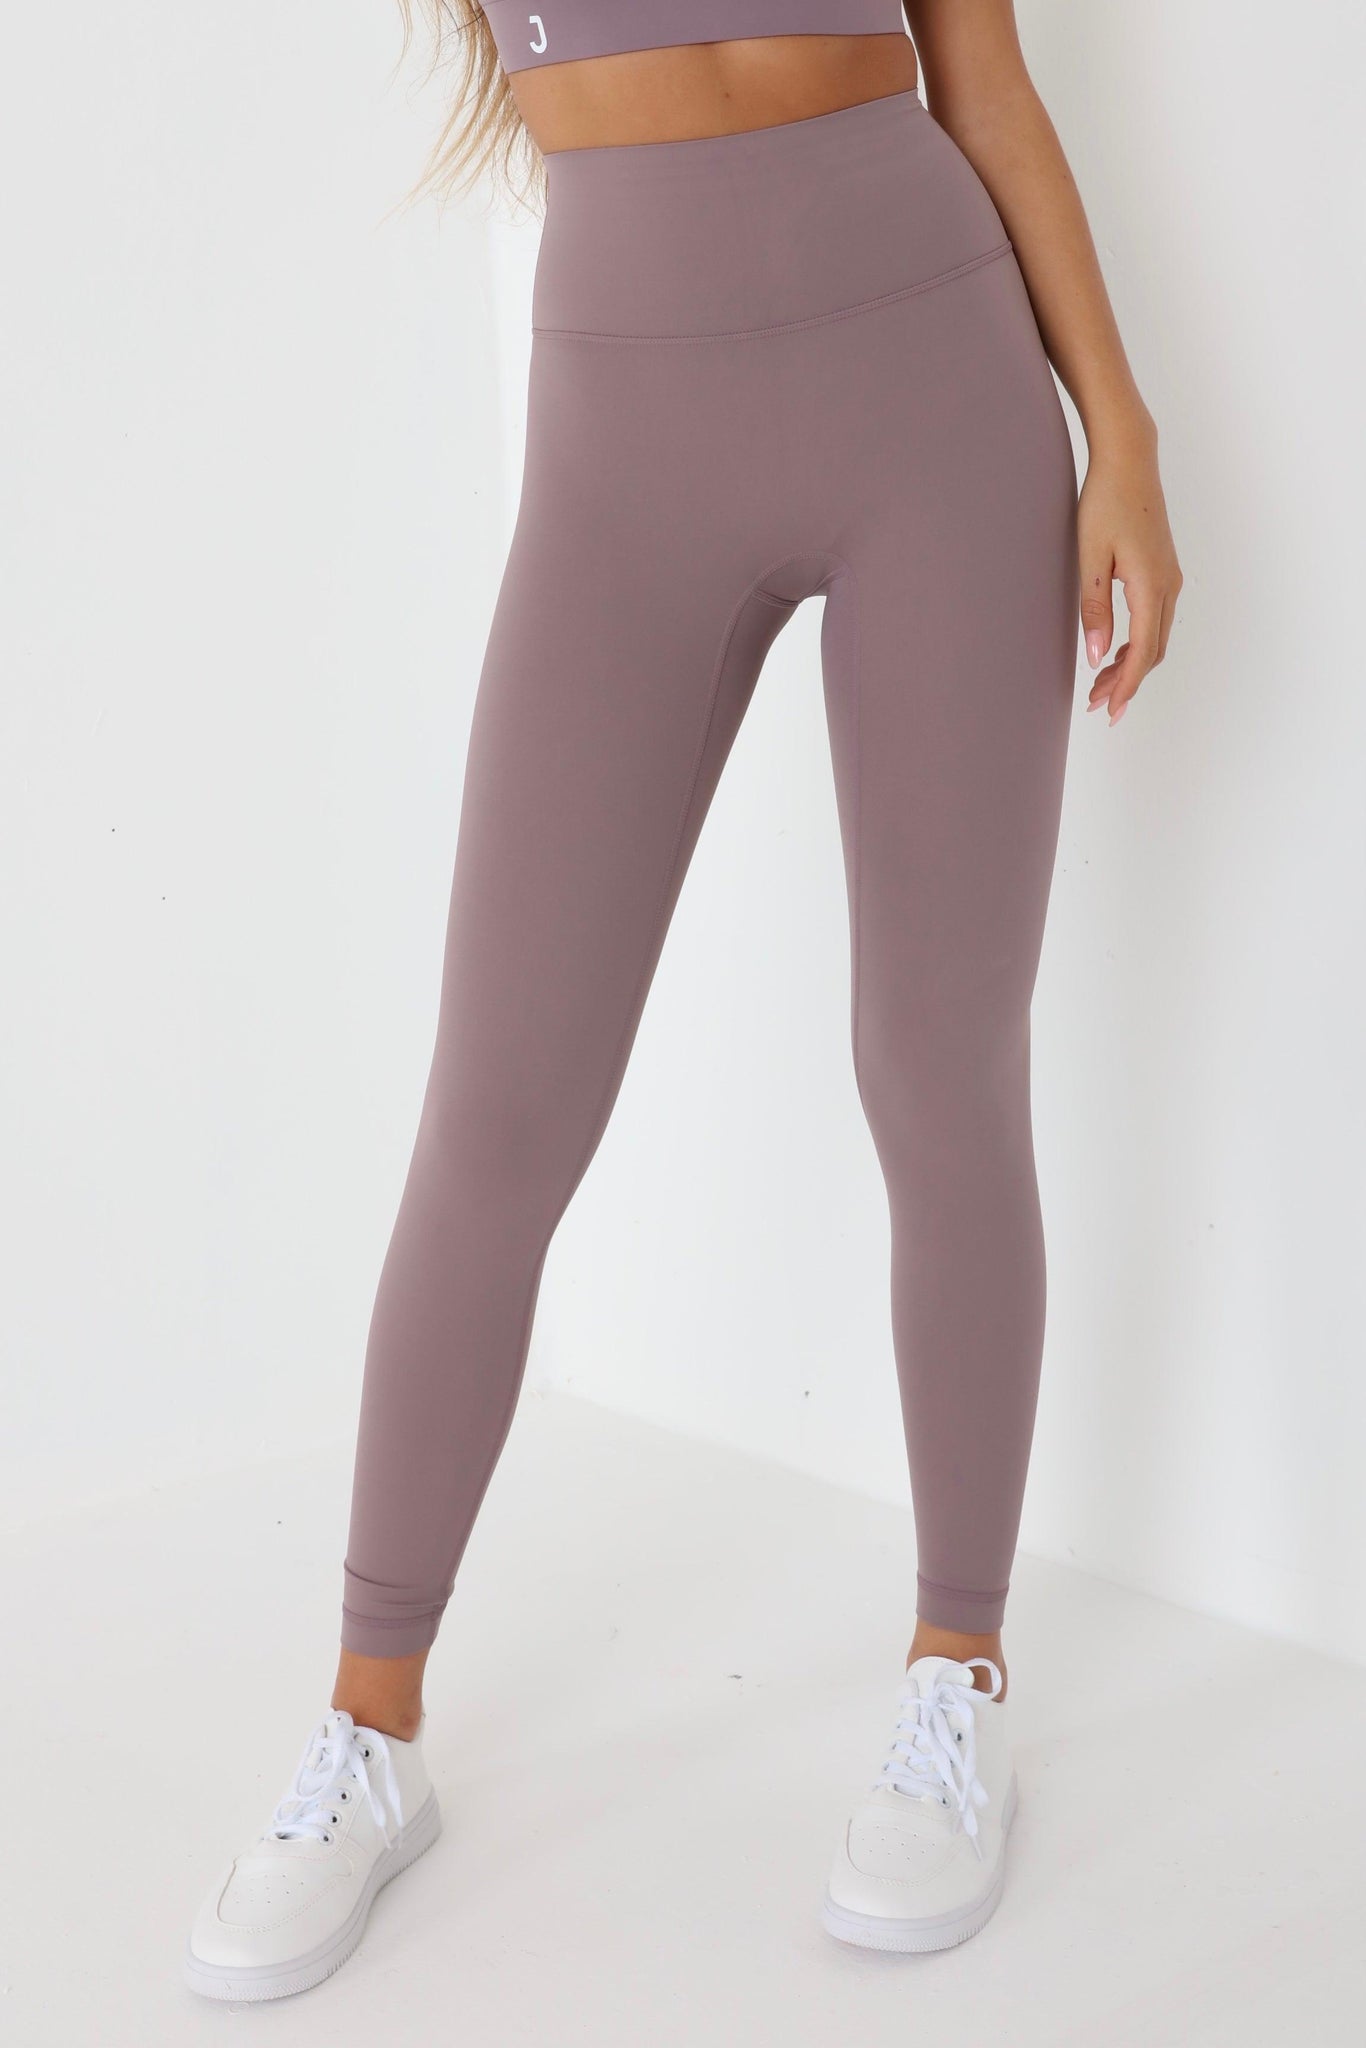 JUV fresh legging in purple color, close up front view.